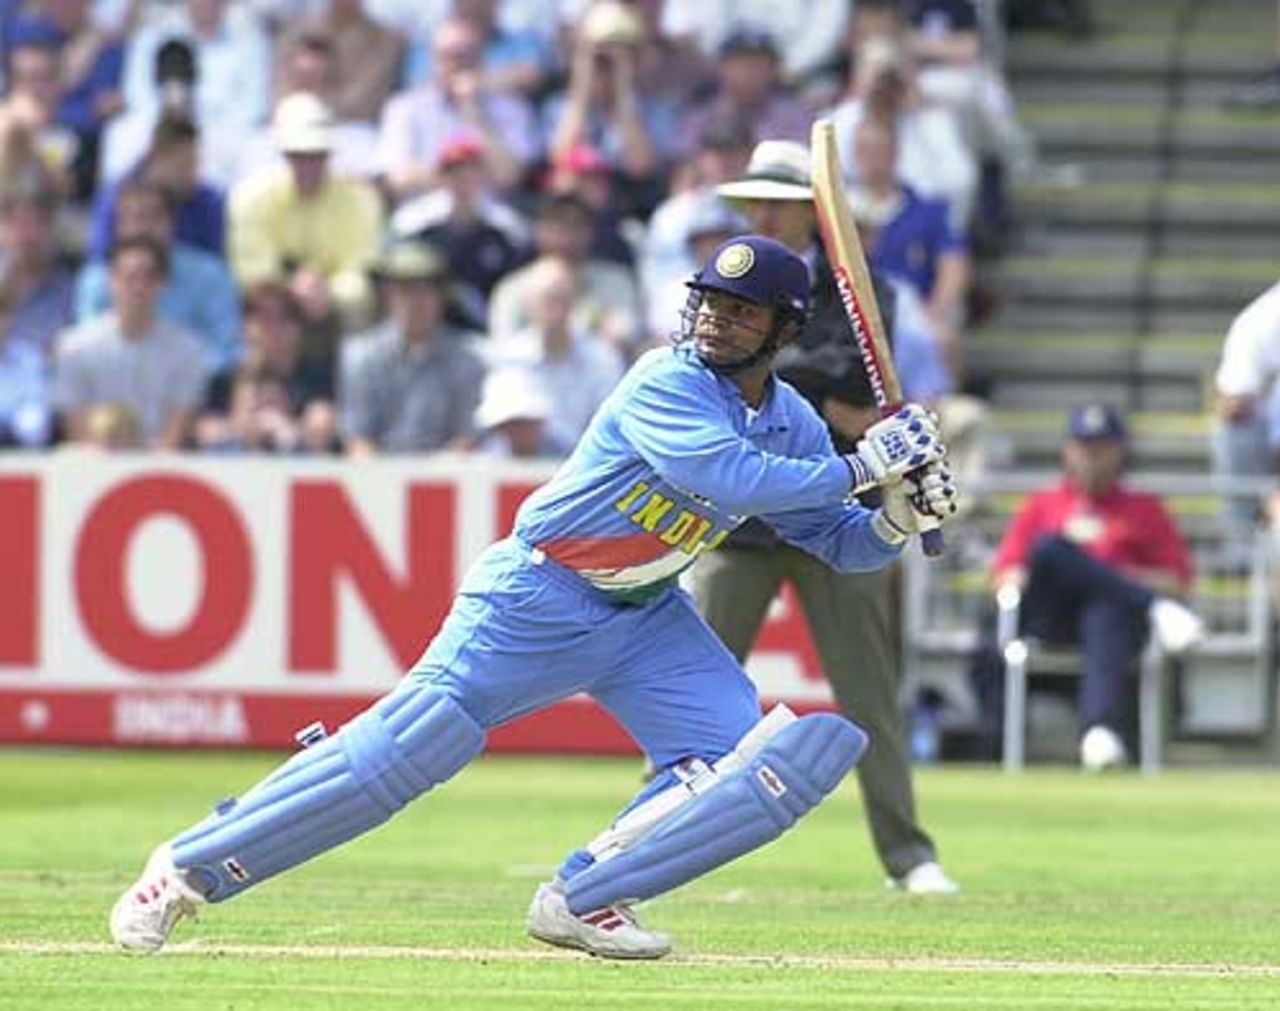 Sehwag displayed all his batting skills at Lord's, England v India, NatWest Series, Lord's, Sat 29 Jun